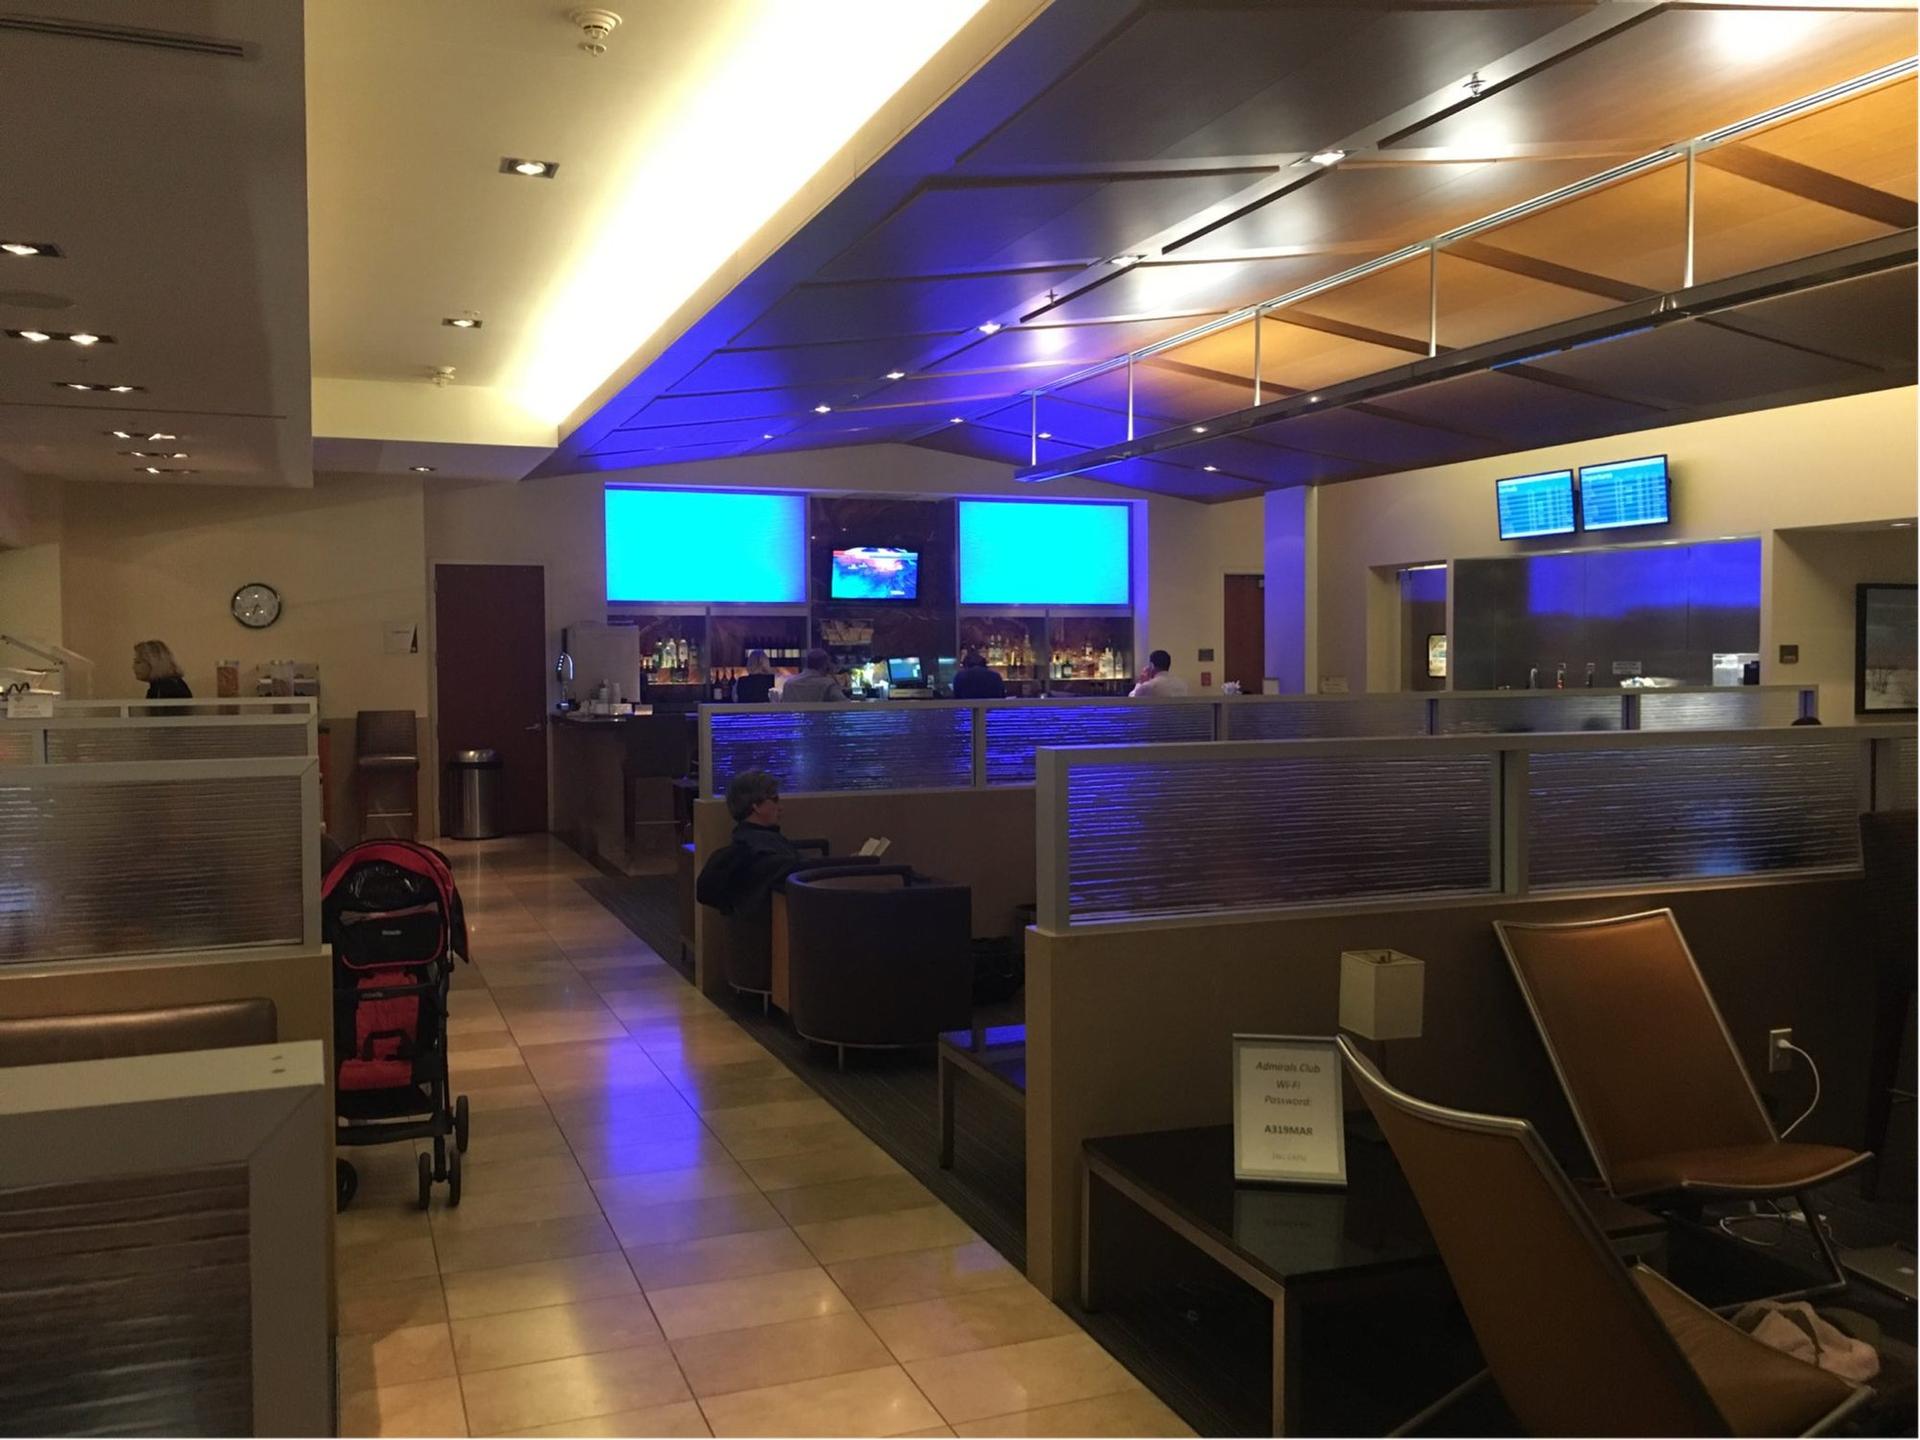 American Airlines Admirals Club image 19 of 31